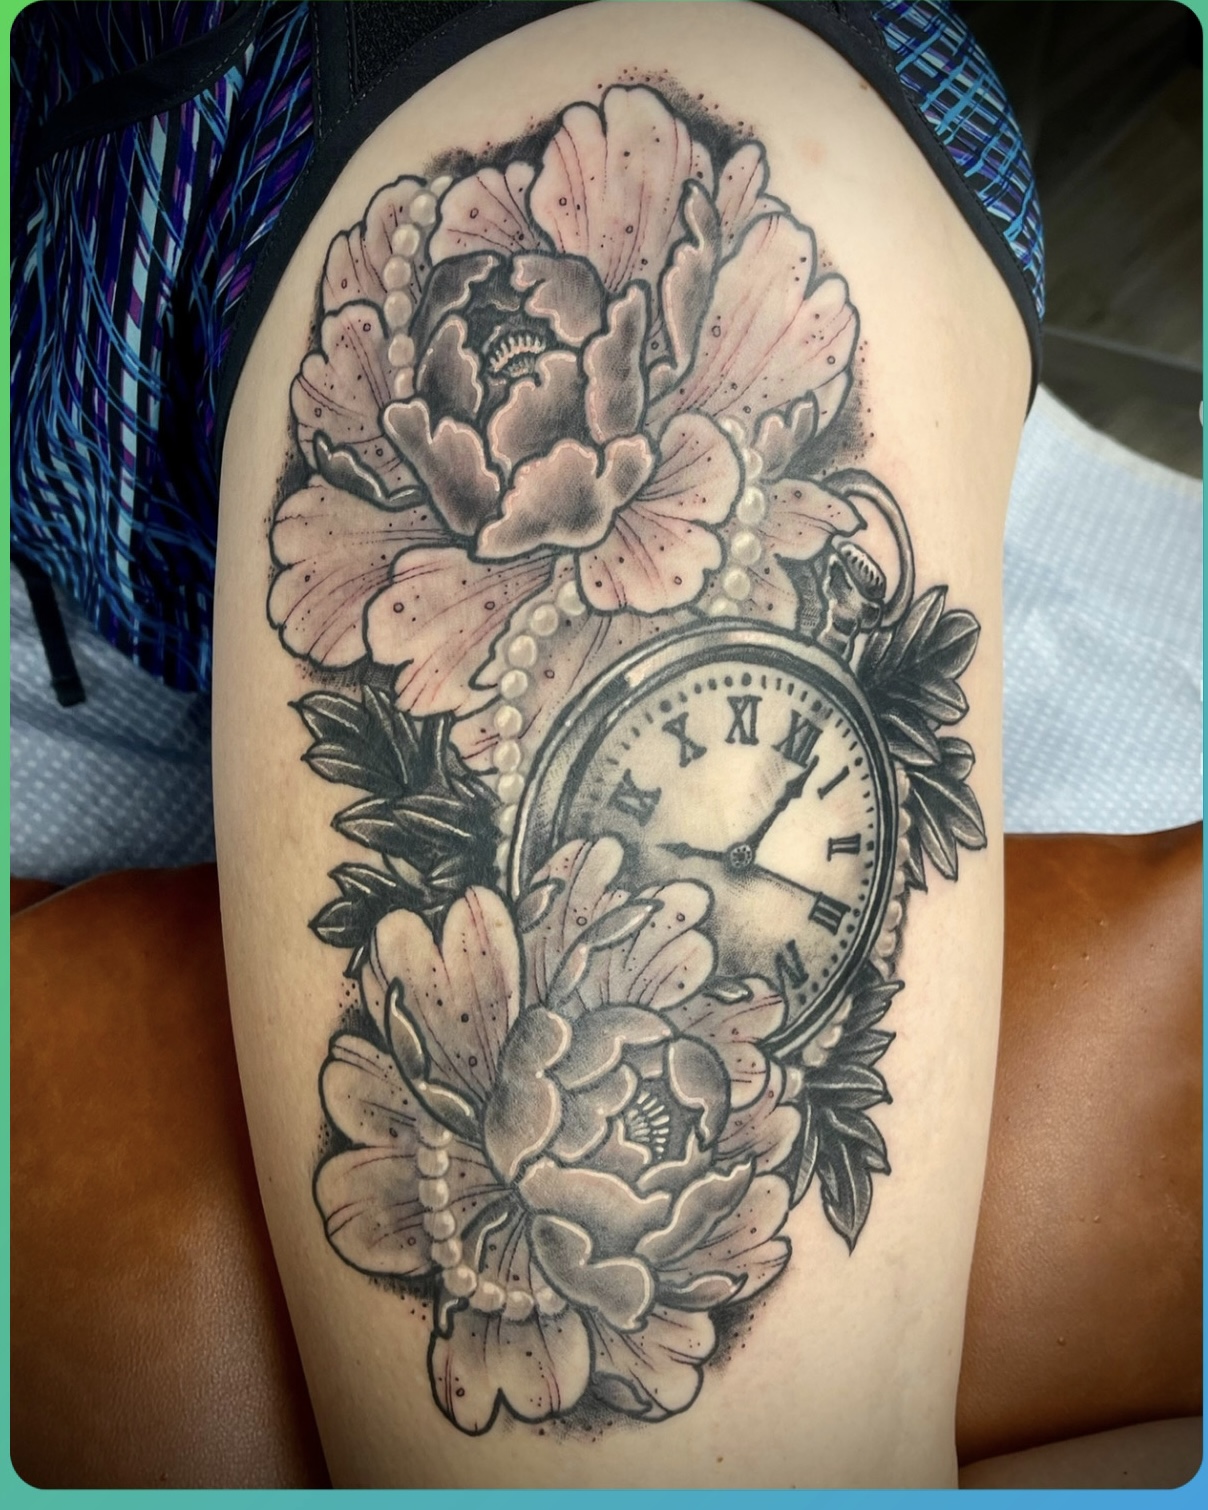 Pocket watch and rose tattoo sitting one by danktat on DeviantArt